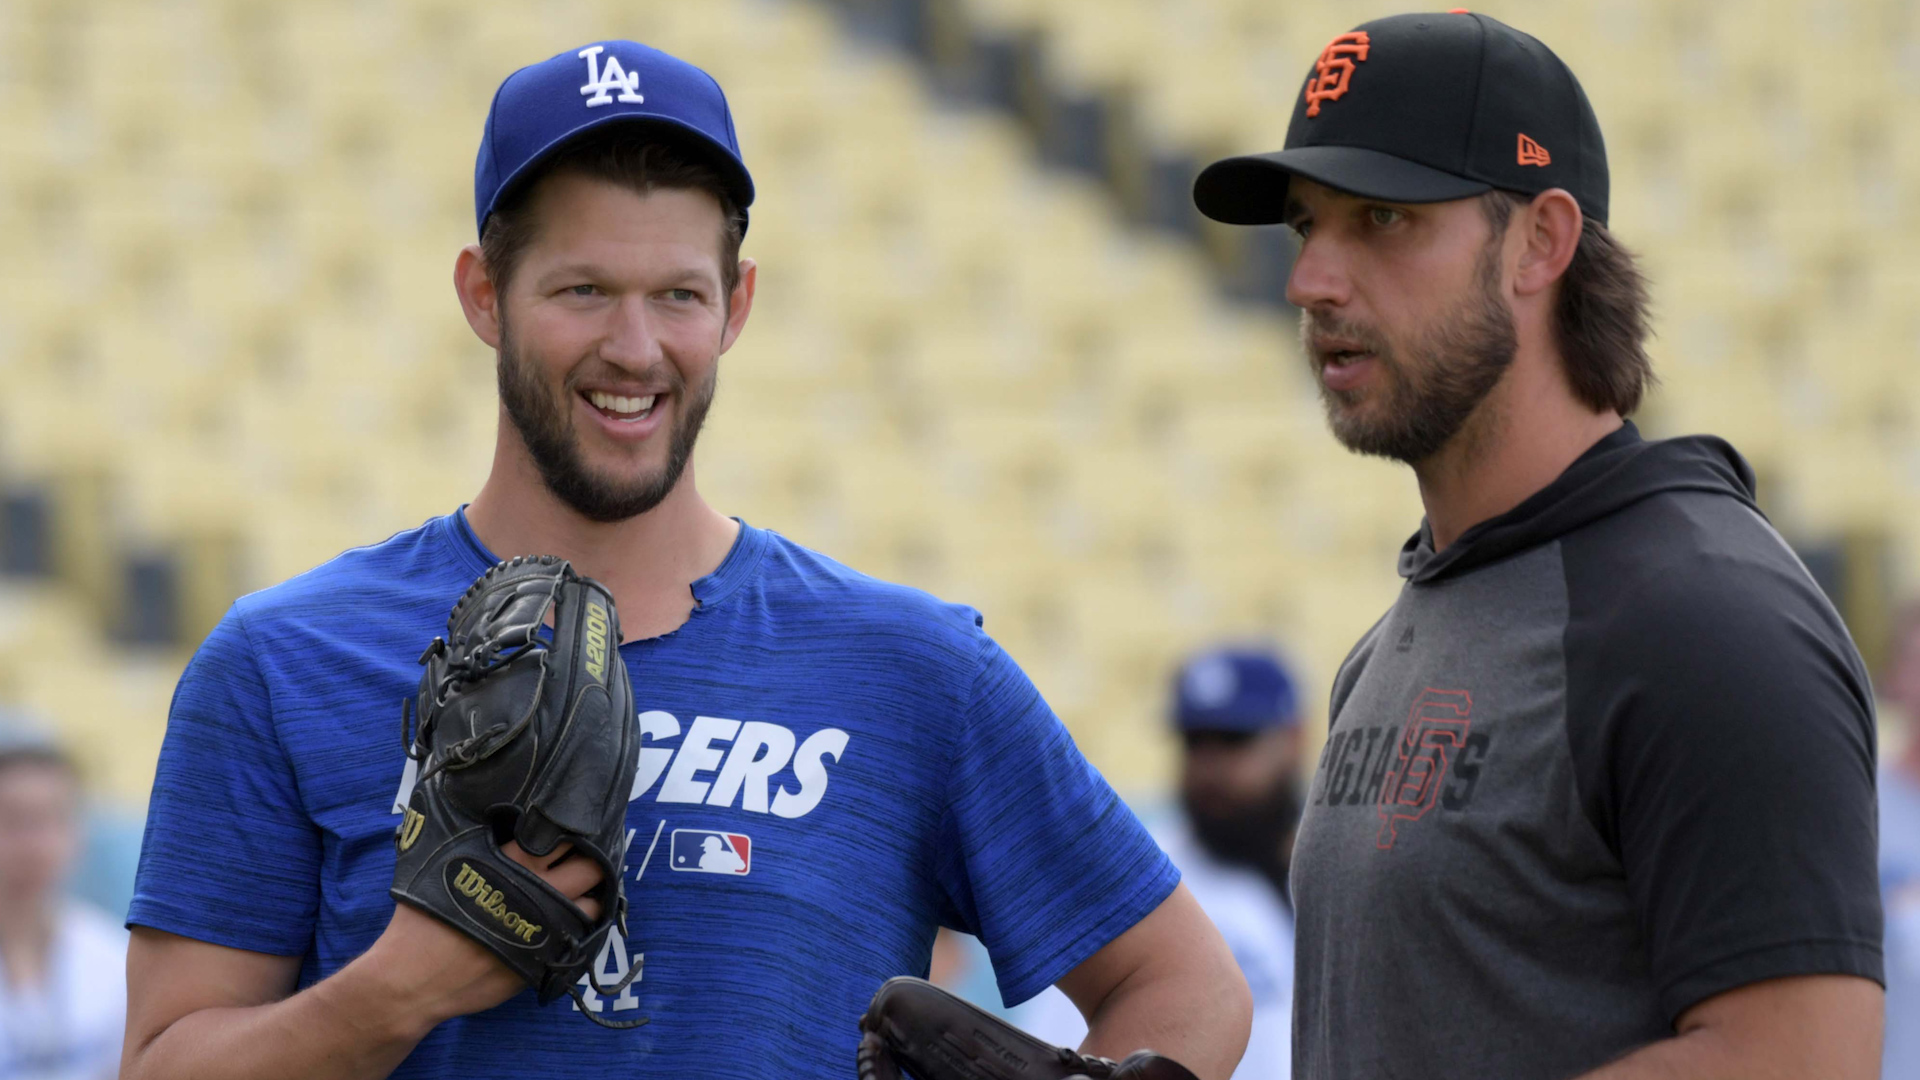 Giants' Bochy: Muncy 'poking the bear' with Bumgarner reference on T-shirt